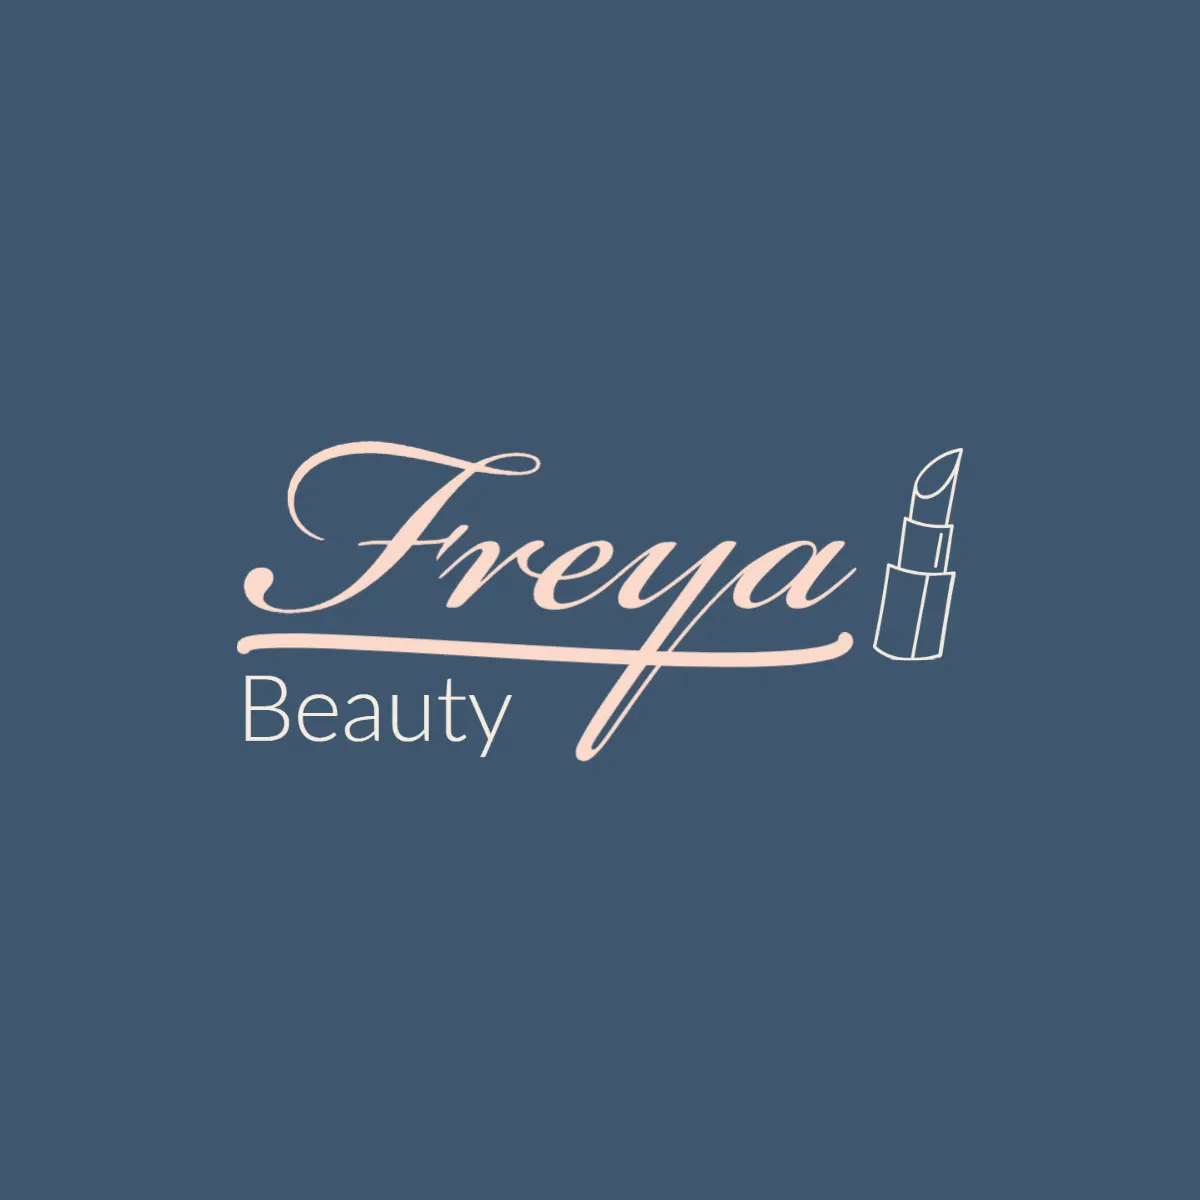 Blue Pink And Beige Beauty Business Logo